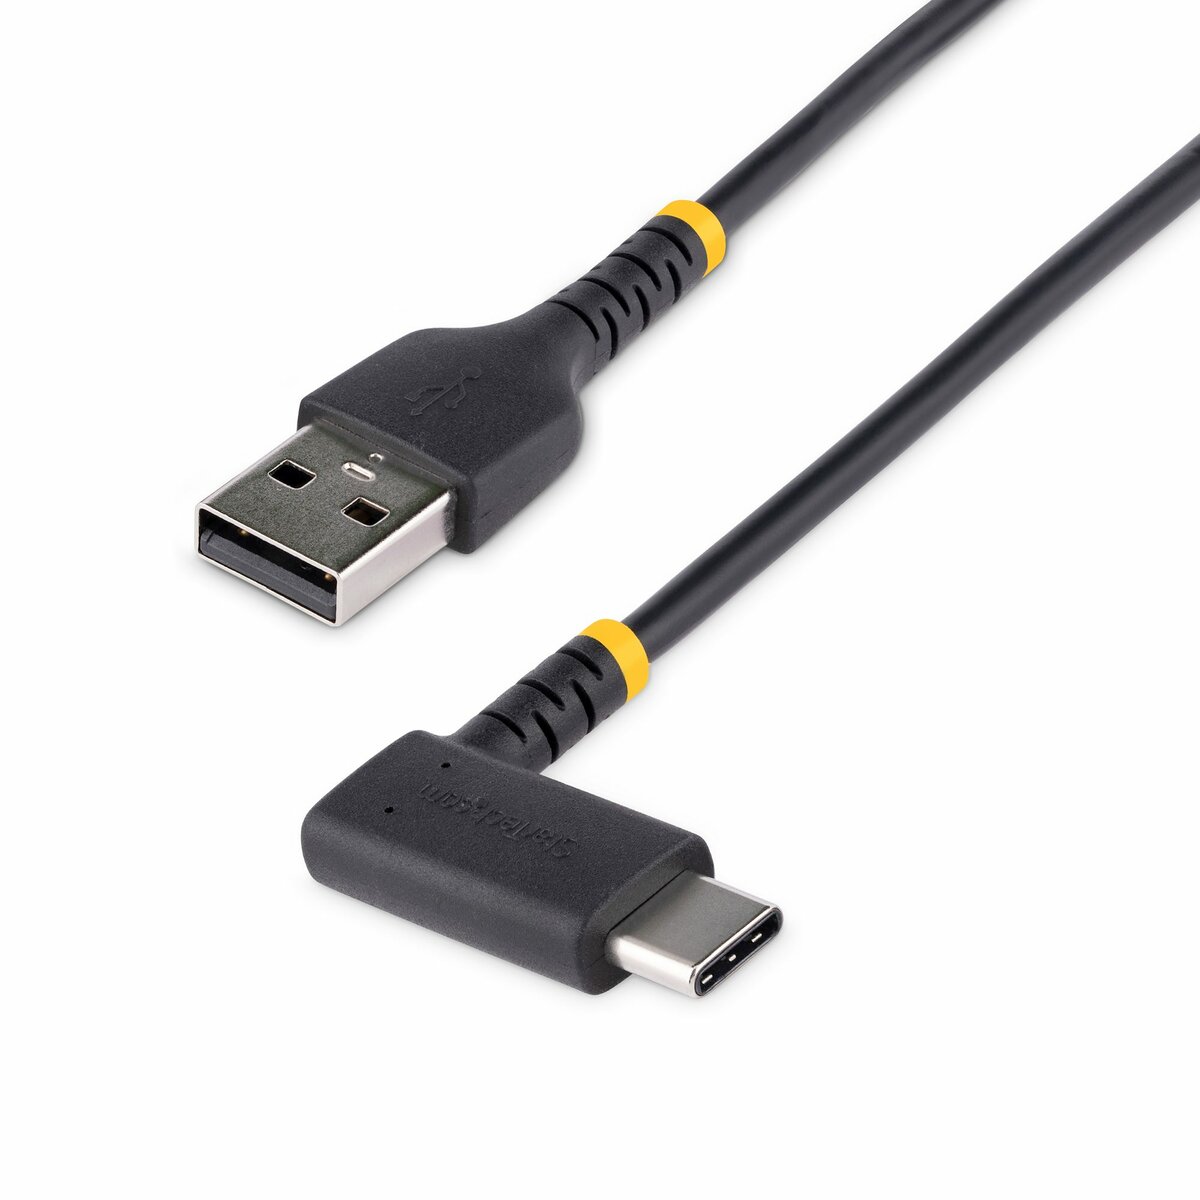  StarTech.com 2m 6 ft USB C Cable - M/M - USB 2.0 - USB-IF  Certified - USB-C Charging Cable - USB 2.0 Type C Cable (USB2CC2M) :  Electronics